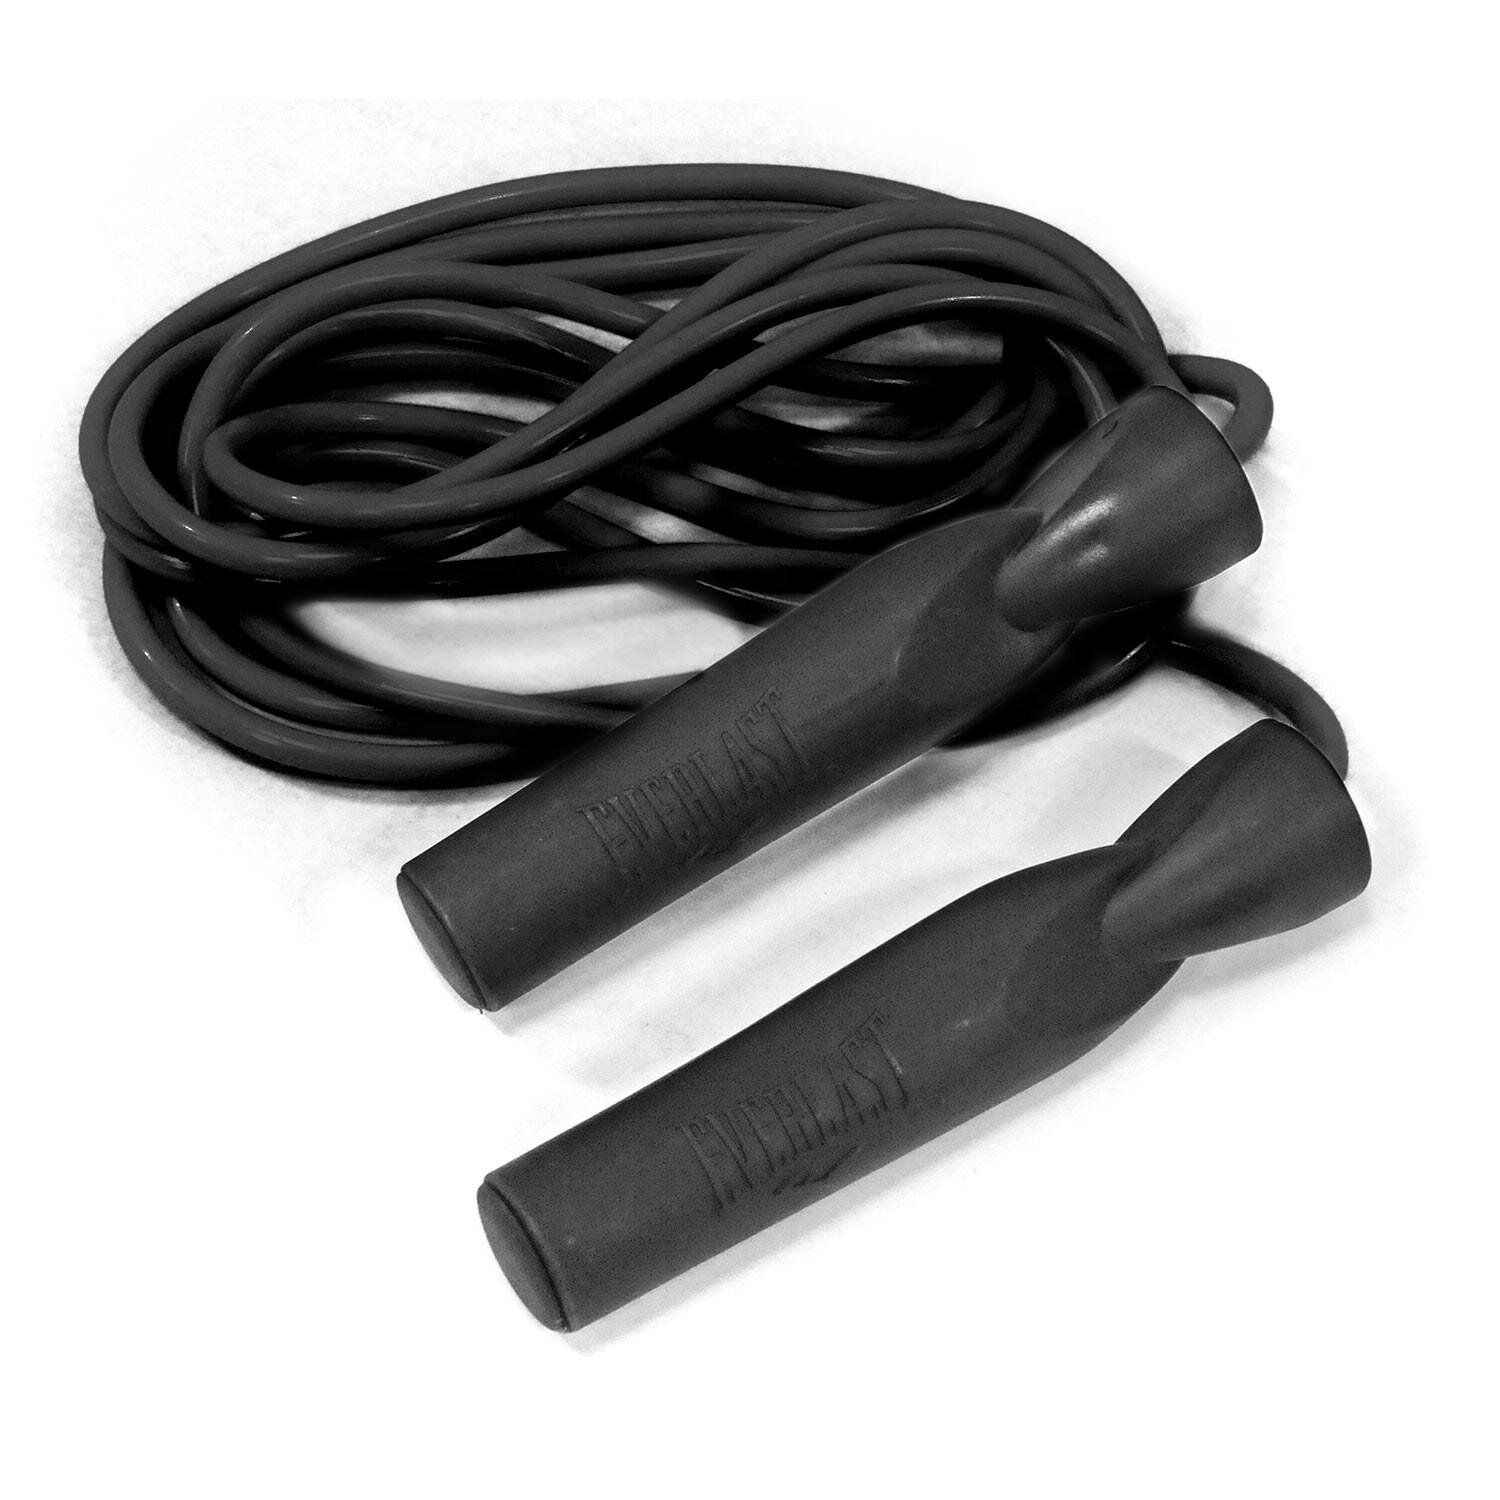 Everlast PVC Jump Rope 292cm - Buy Online - Ph: 1800-370-766 - AfterPay &  ZipPay Available!